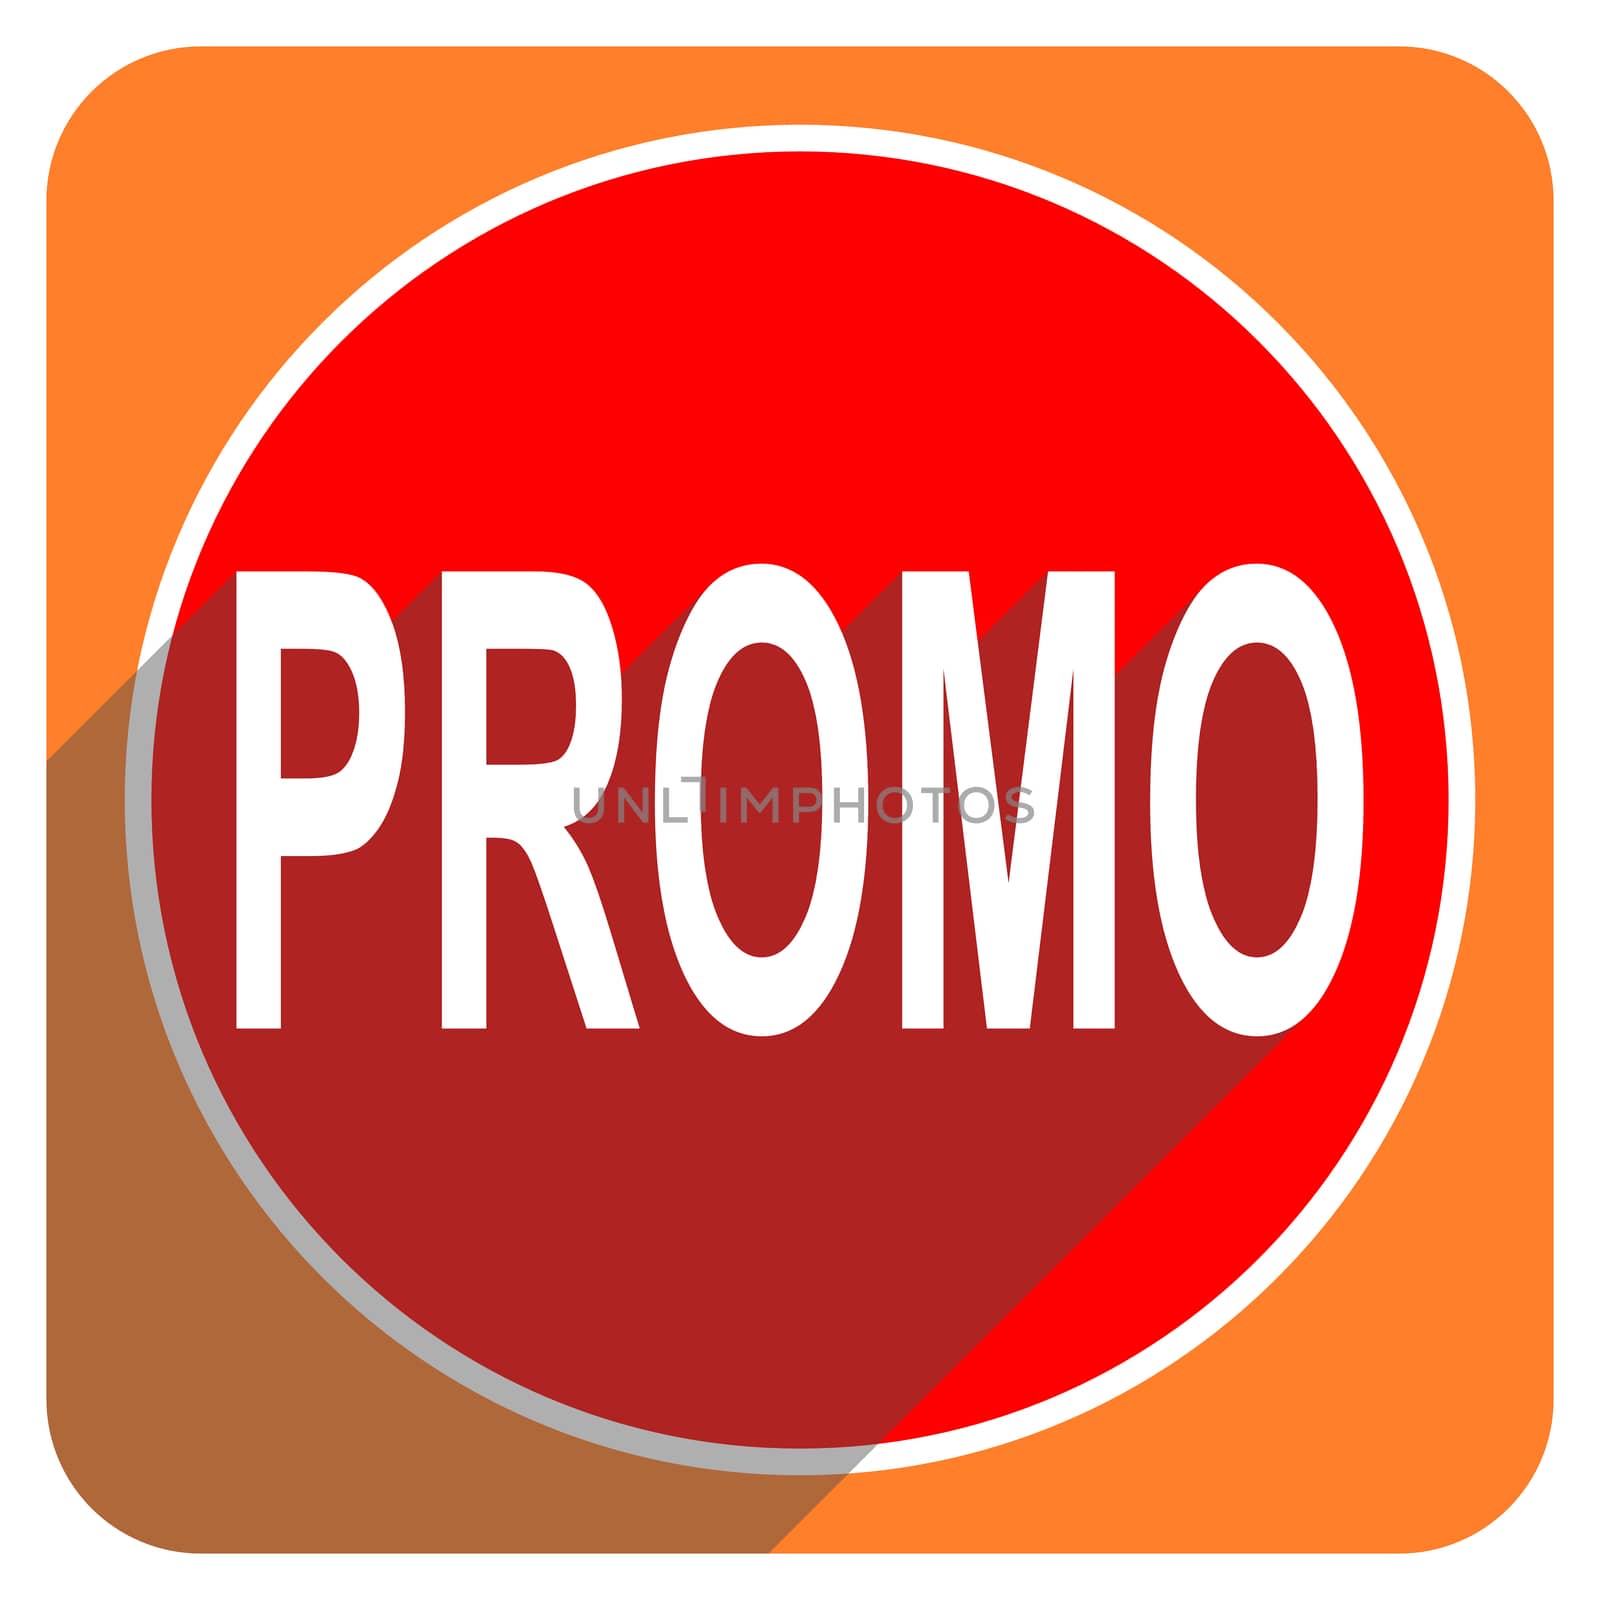 promo red flat icon isolated